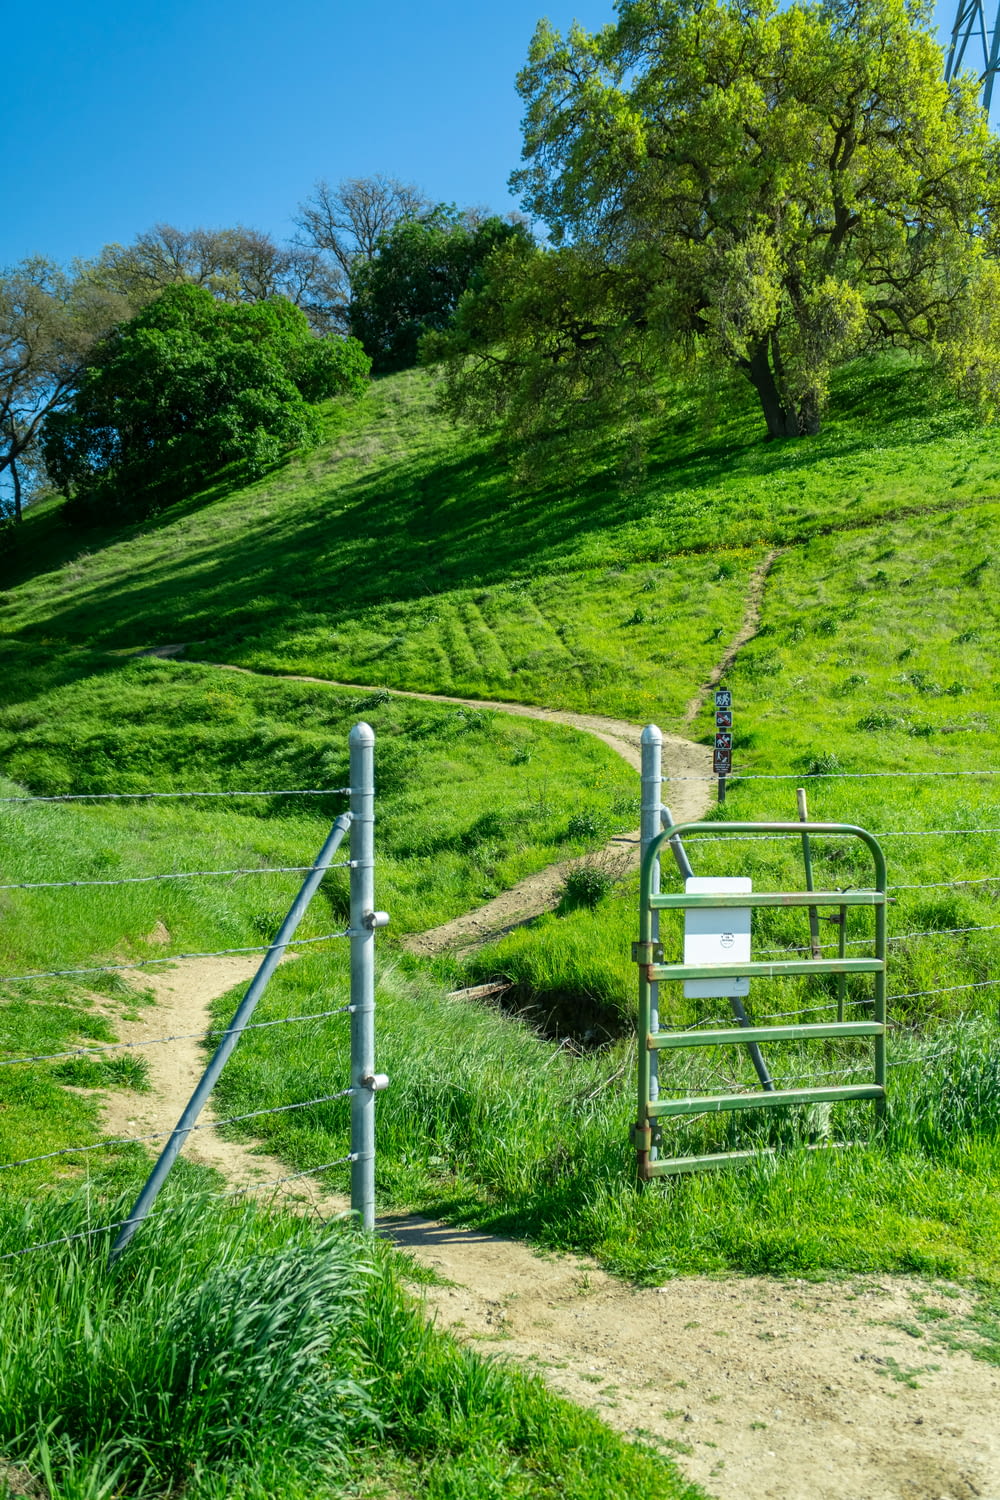 a metal gate on the side of a grassy hill